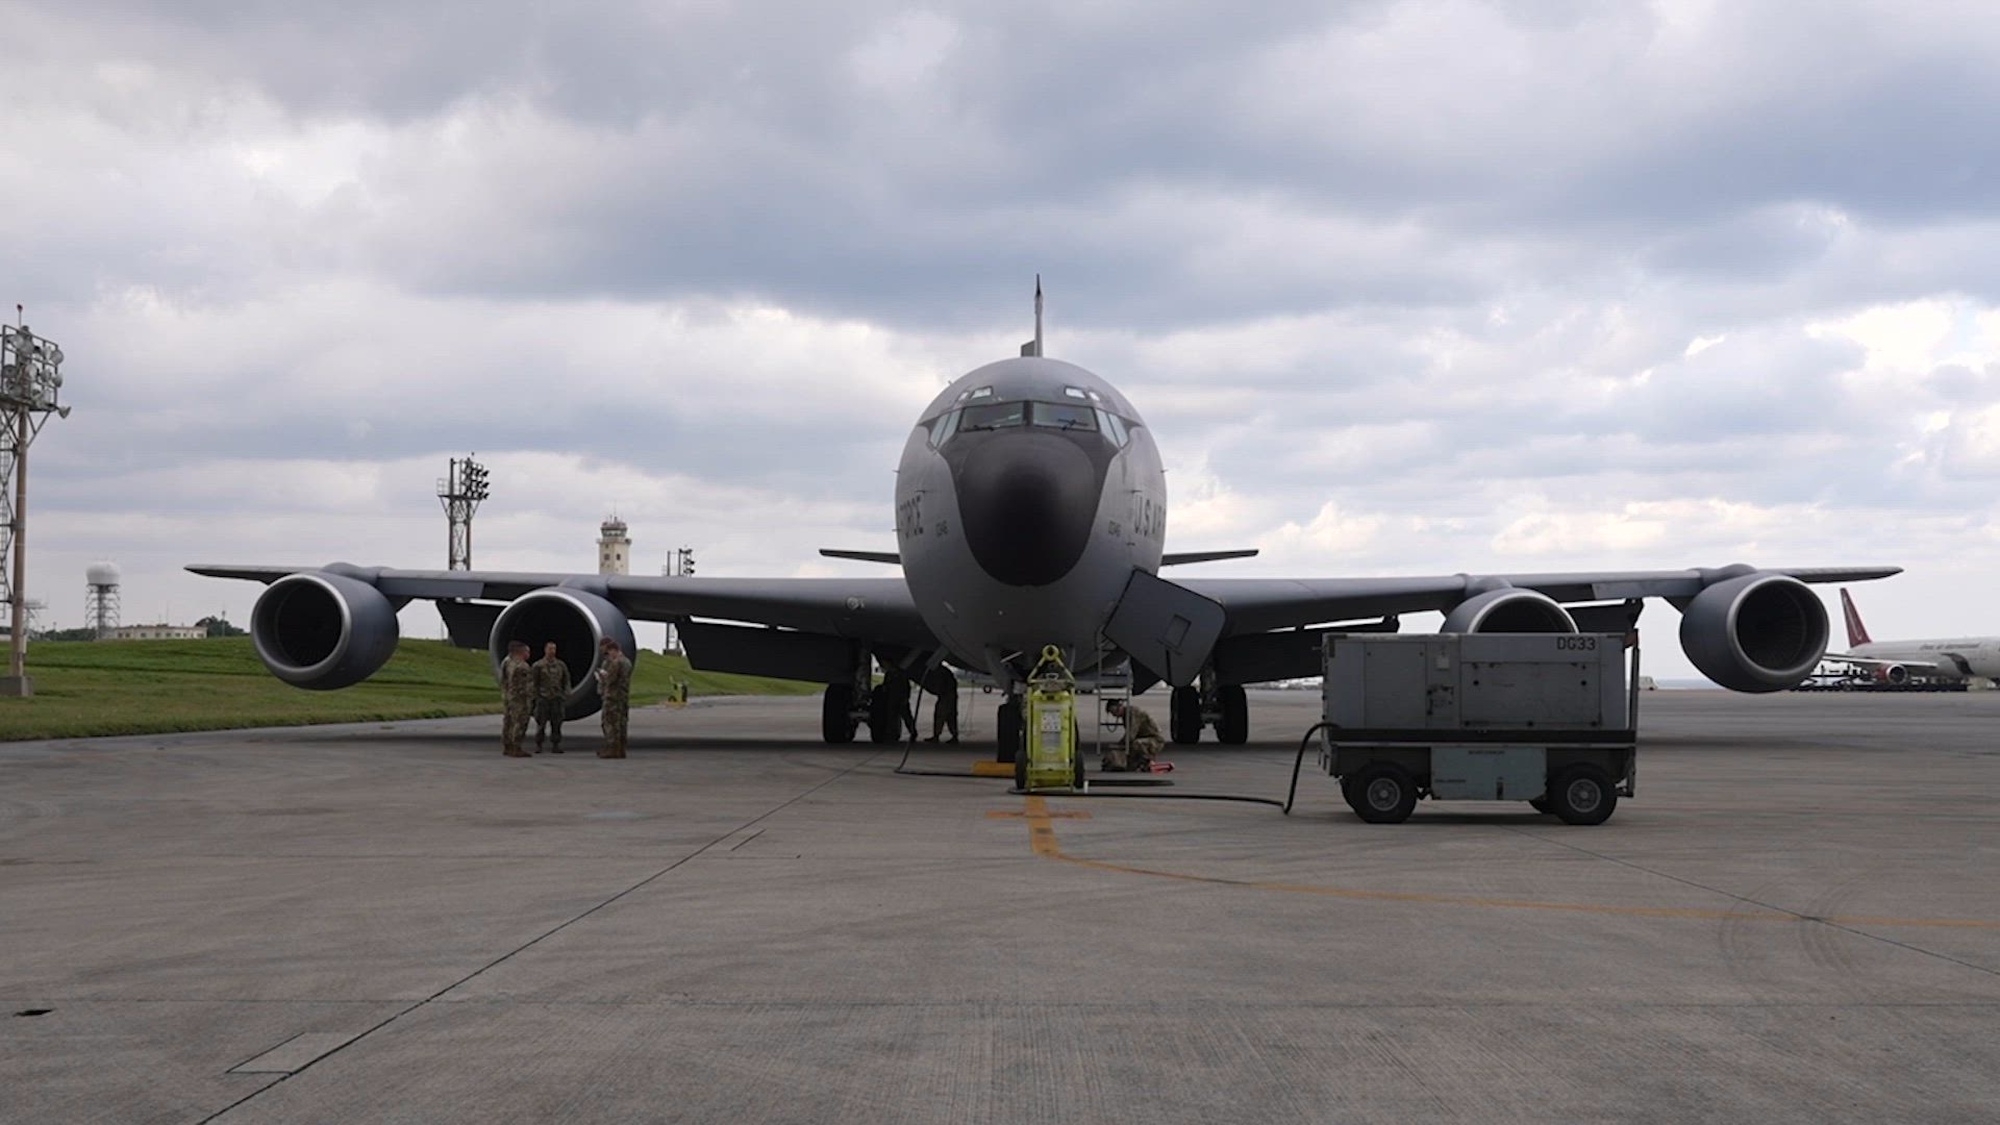 U.S. Air Force Airmen assigned to the 171st Air Refueling Squadron from Selfridge Air National Guard Base, Michigan, assisted the 909th ARS in refueling both USAF and U.S. Navy aircraft during a two week deployment at Kadena Air Base, Japan, March 10, 2024. The ANG routinely augments active duty forces, helping bolster operational manpower and relieving pressure off their AD counterparts during events or day to day operations. (U.S. Air Force video by Airman 1st Class Luis E. Rios Calderon)